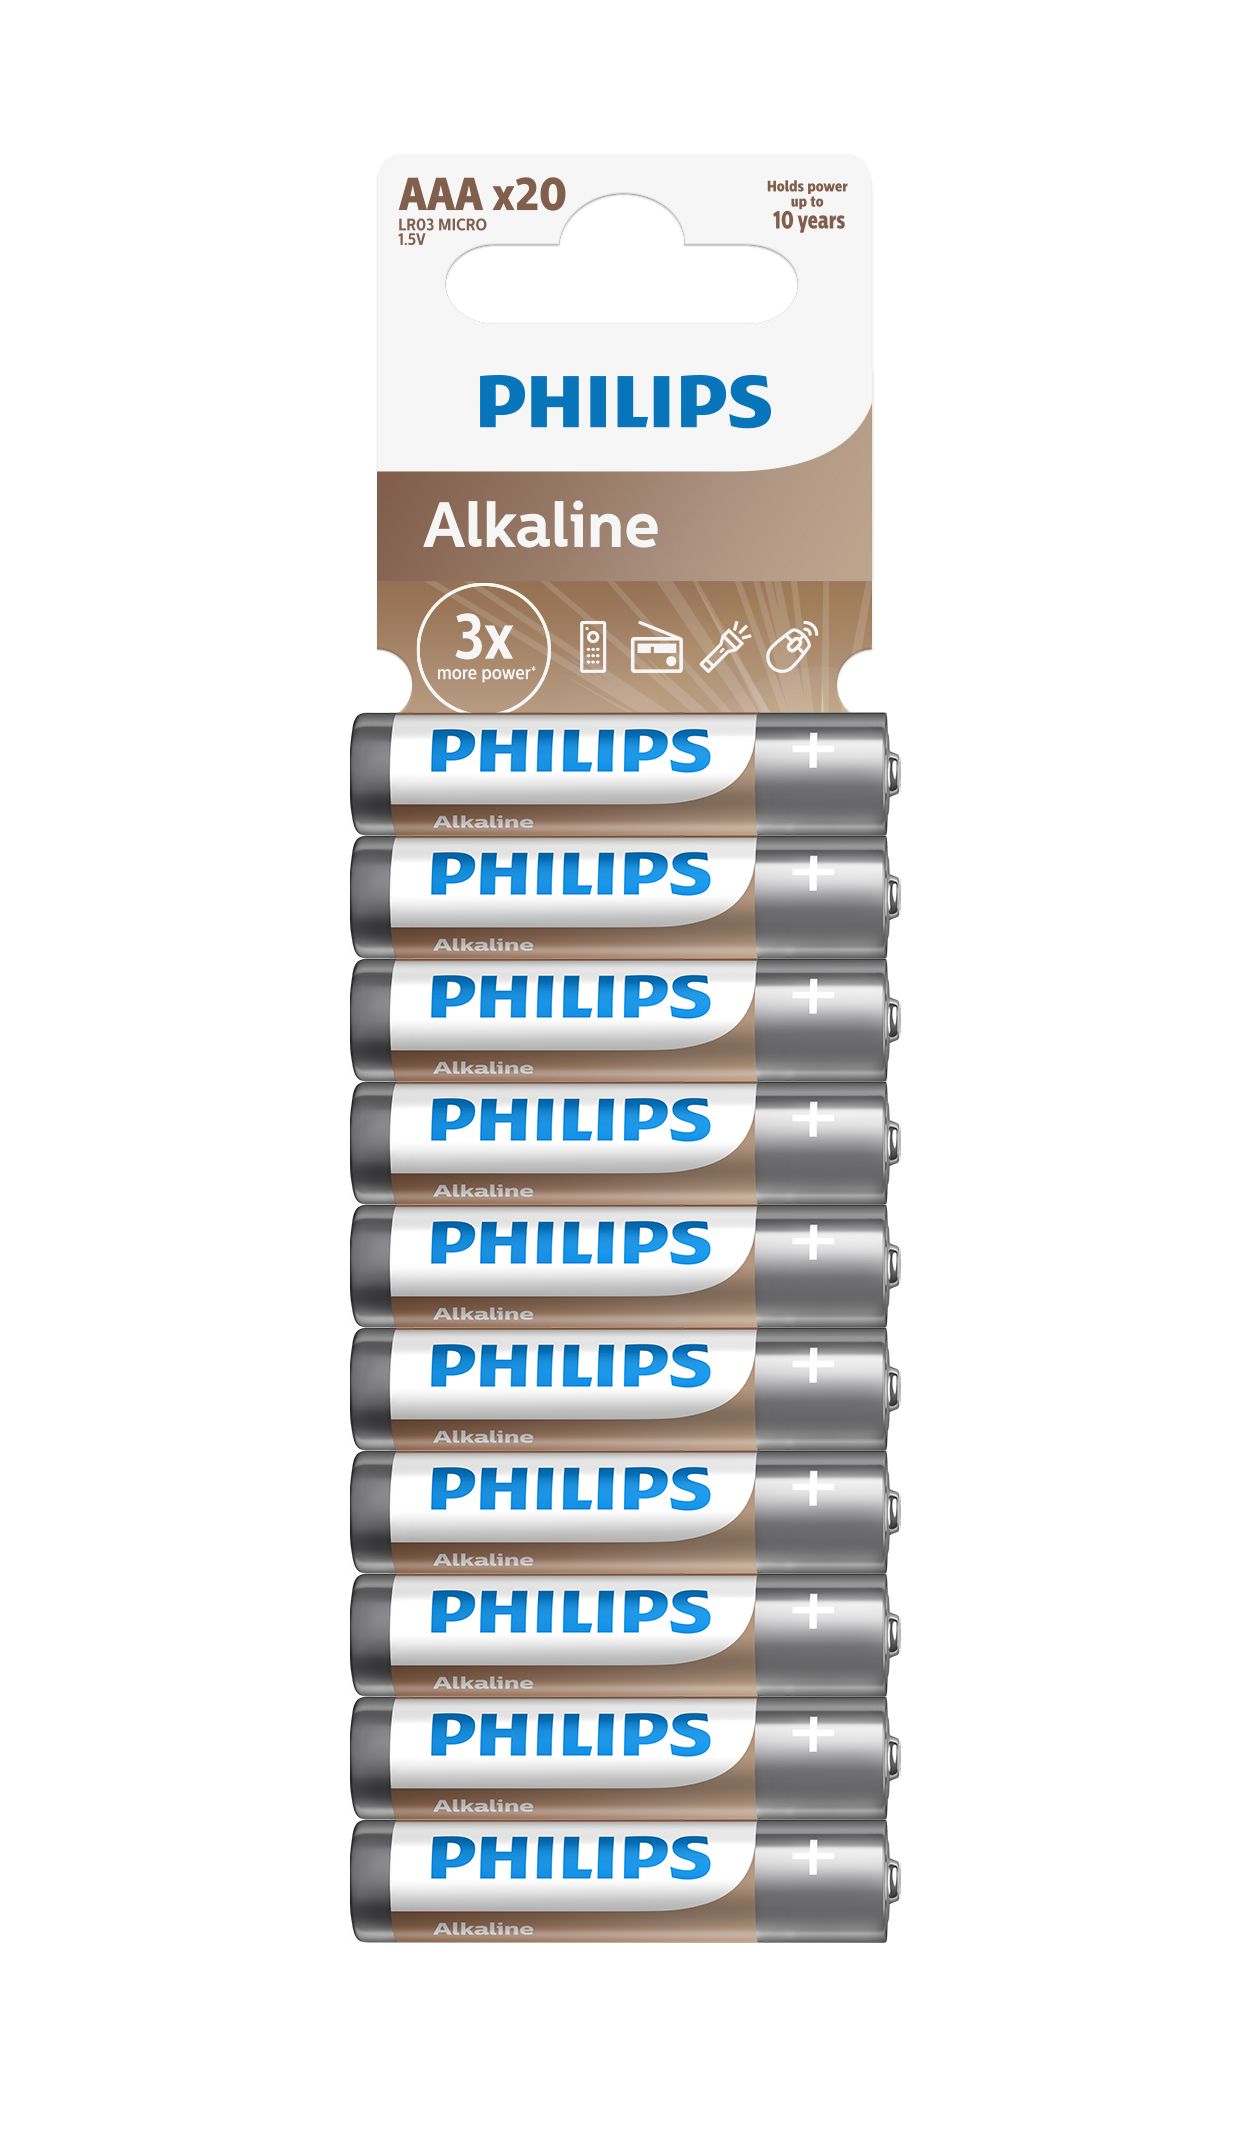 Alkaline tech is ideal for energy-hungry devices.